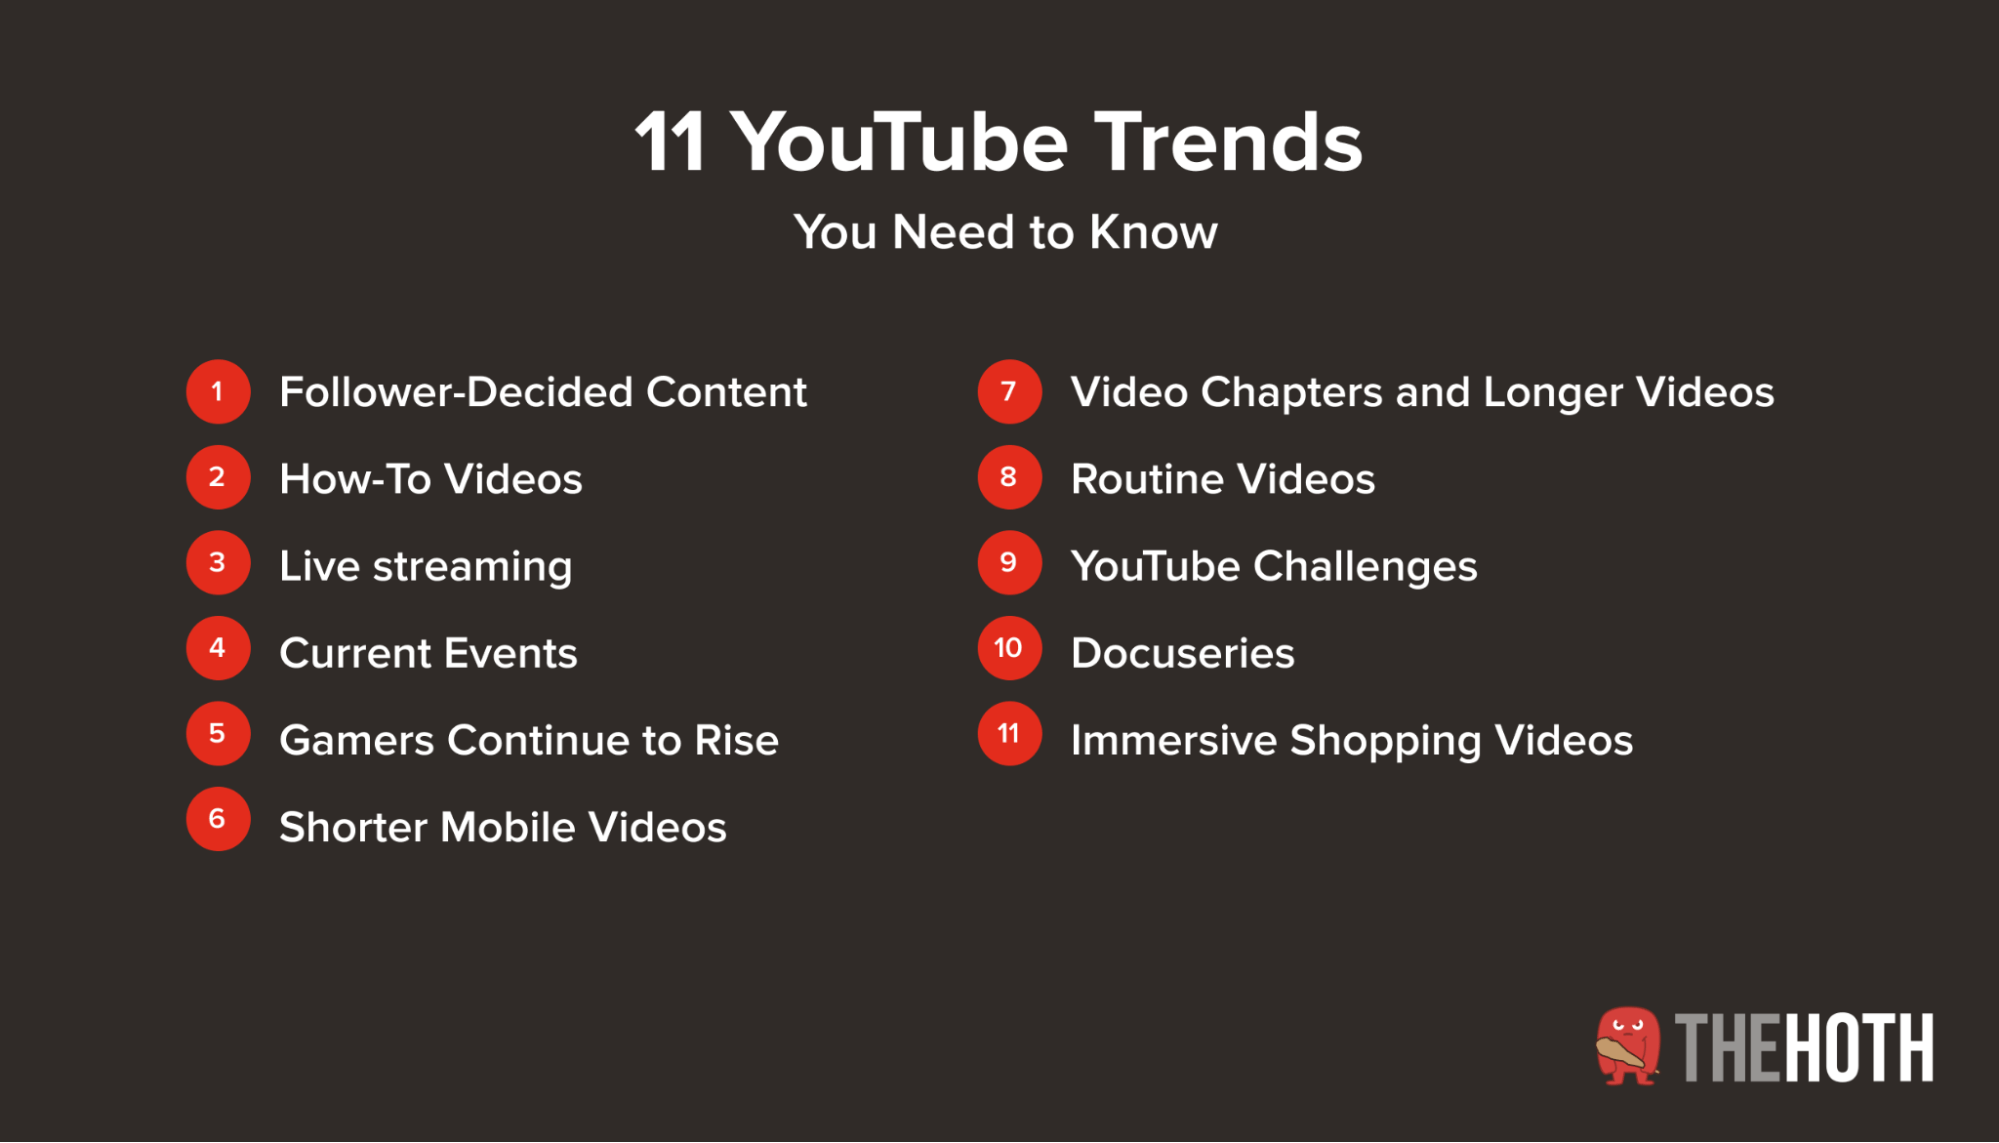 11 YouTube Trends for 2022 The HOTH